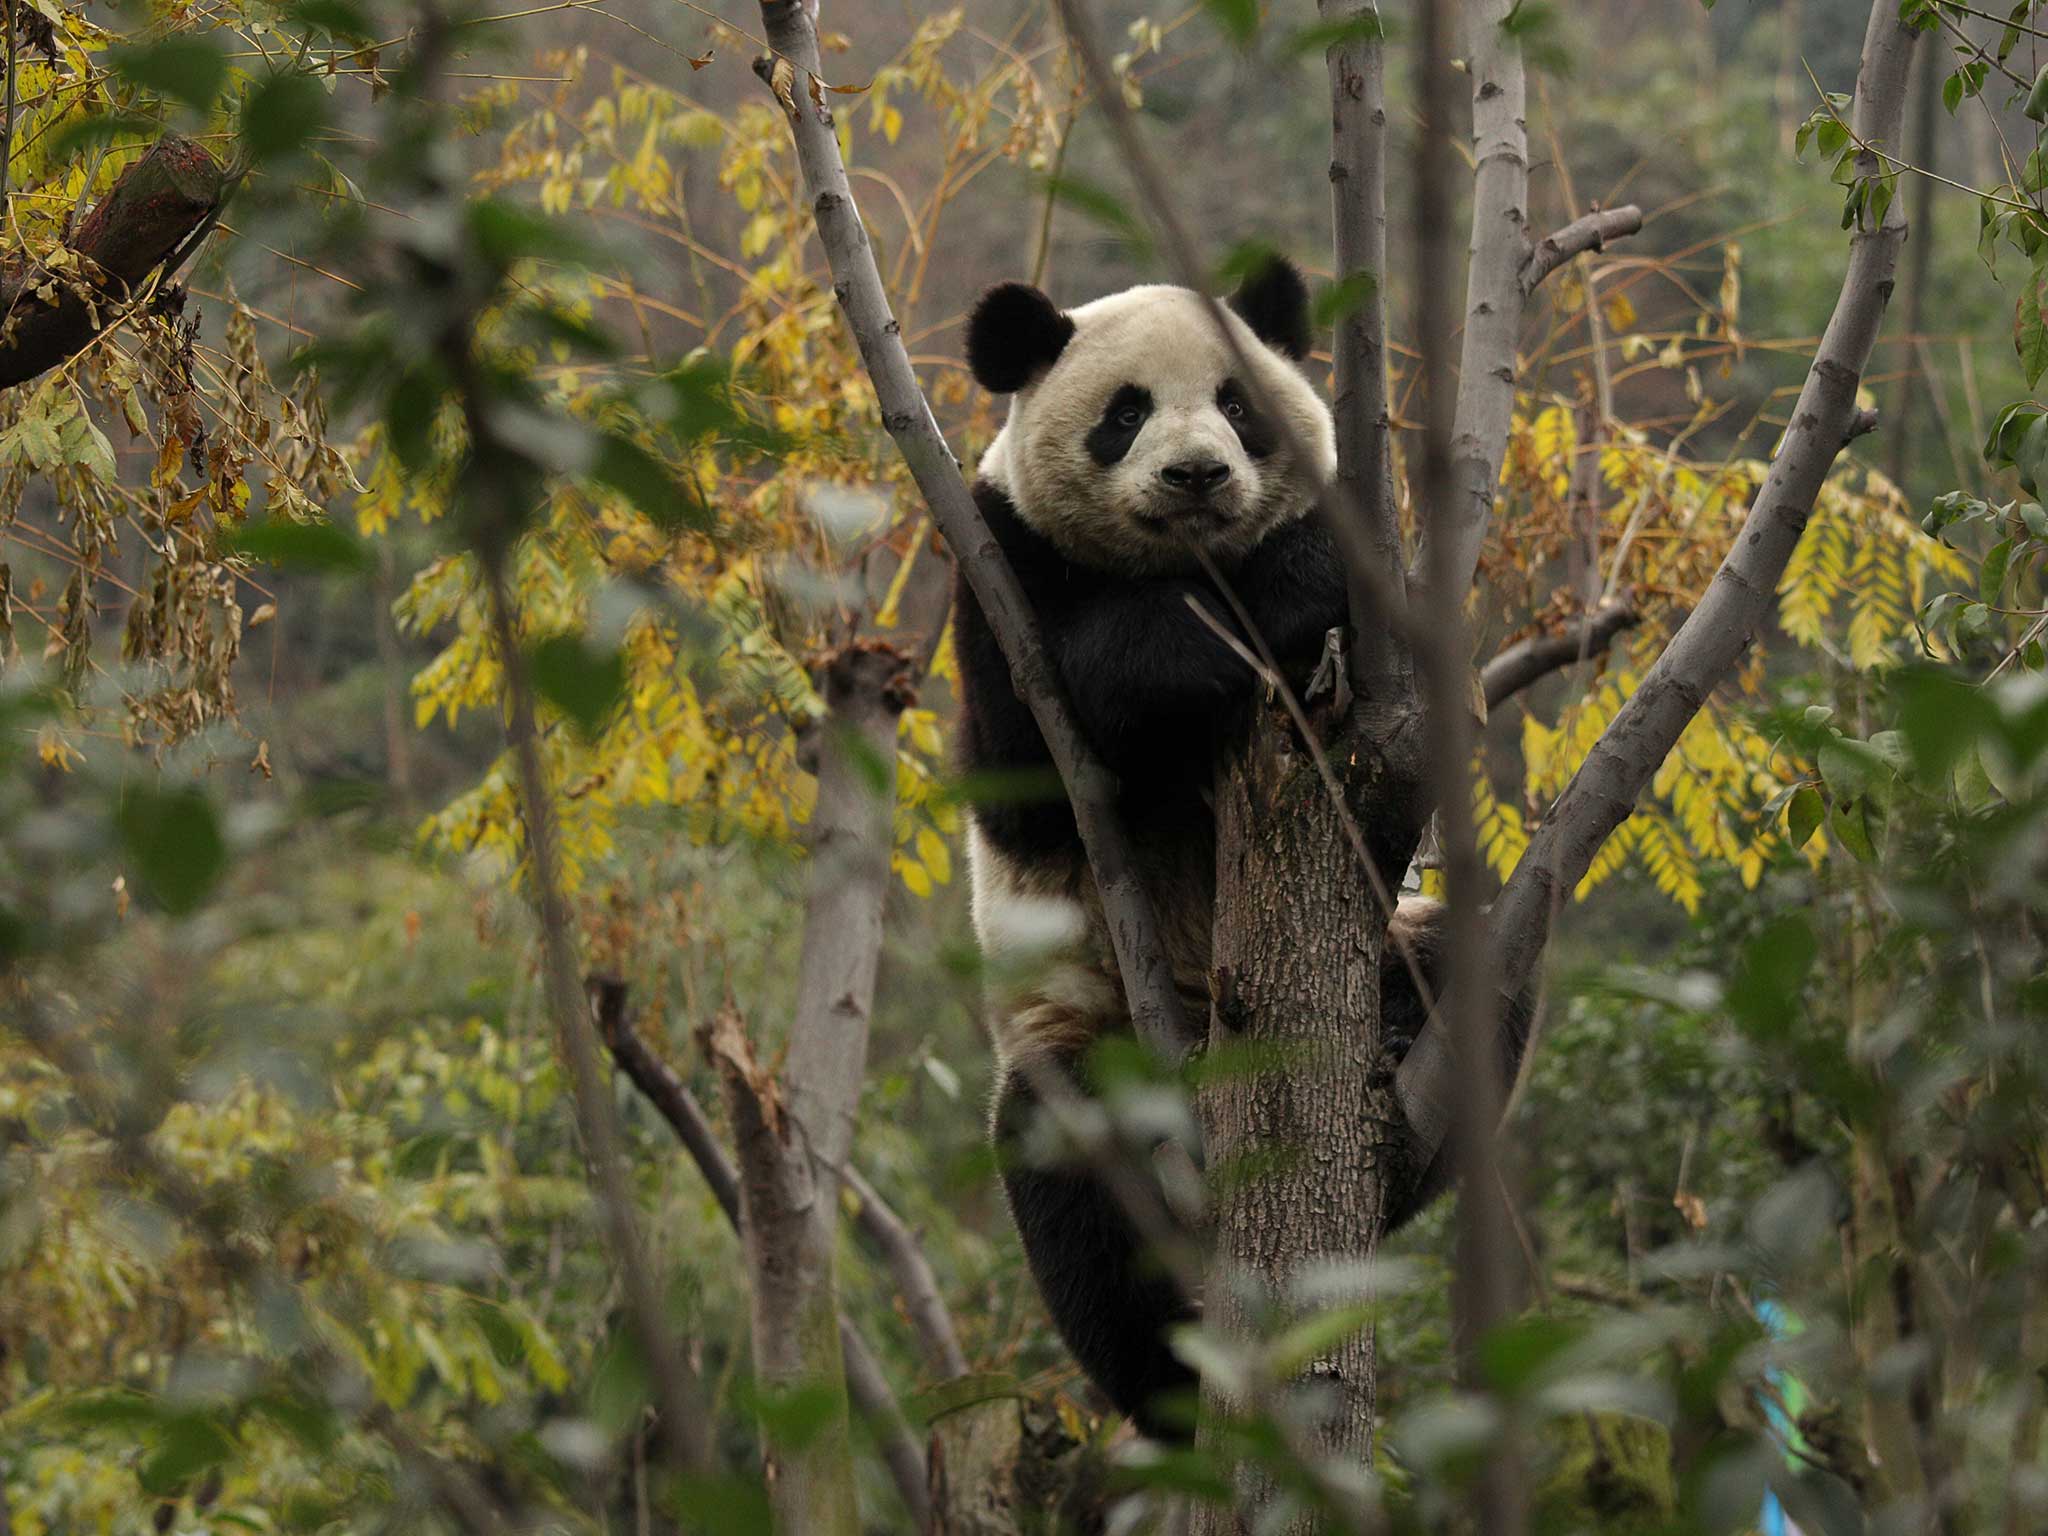 A Giant Panda up a tree in China